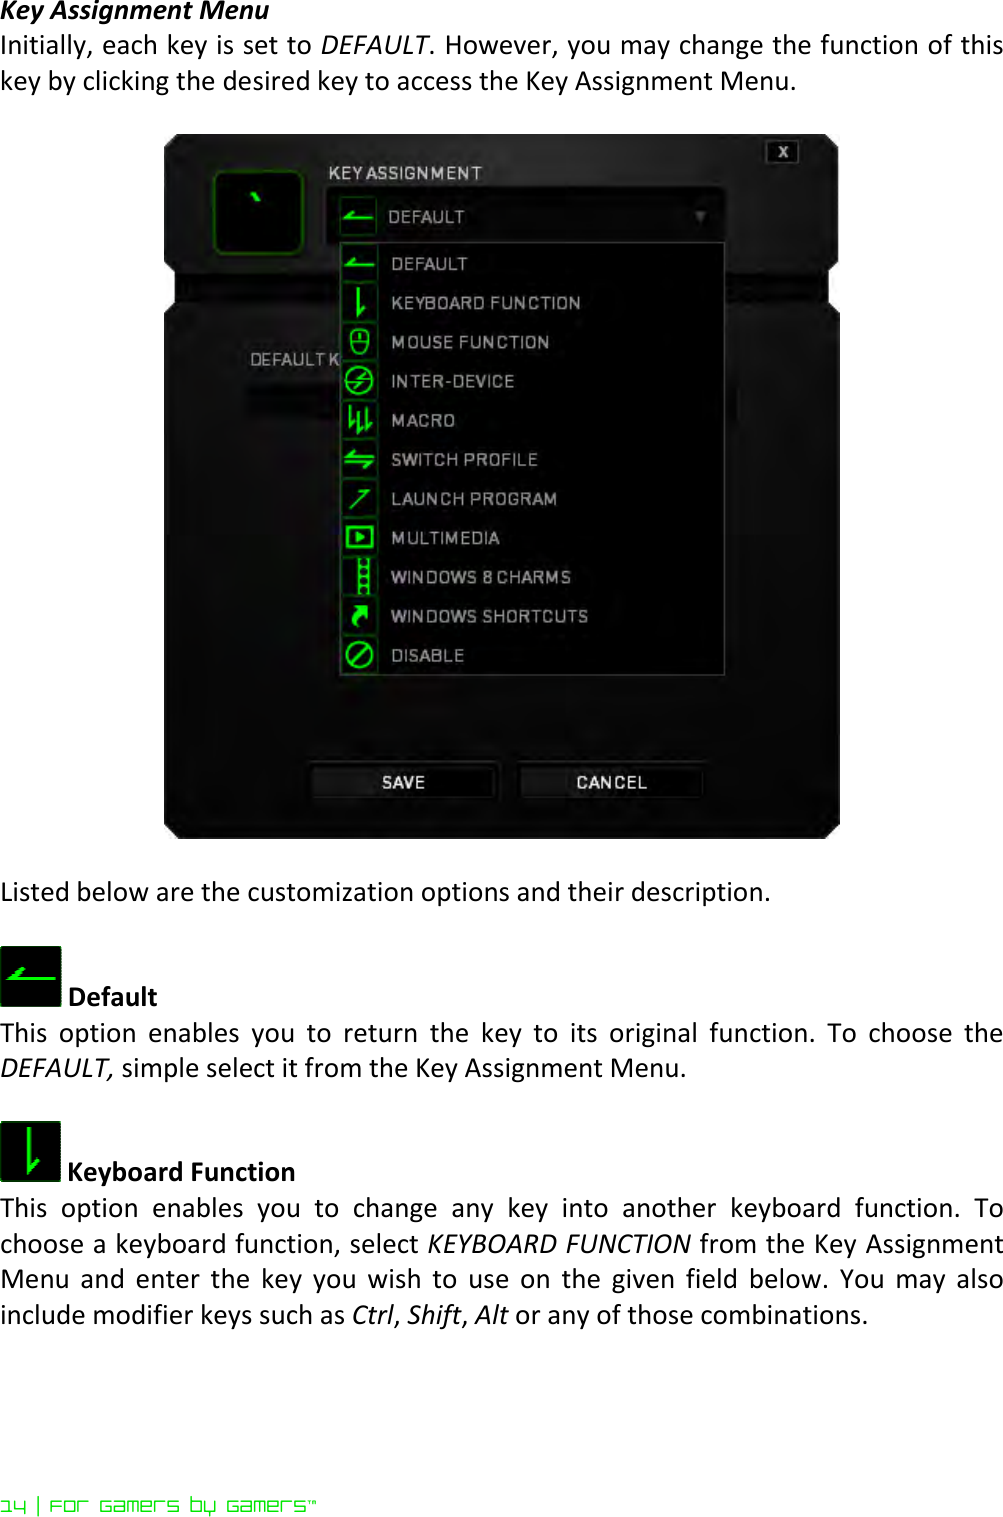 14 | For gamers by gamers™  Key Assignment Menu Initially, each key is set to DEFAULT. However, you may change the function of this key by clicking the desired key to access the Key Assignment Menu.    Listed below are the customization options and their description.   Default  This  option  enables  you  to  return  the  key  to  its  original  function.  To  choose  the DEFAULT, simple select it from the Key Assignment Menu.   Keyboard Function This  option  enables  you  to  change  any  key  into  another  keyboard  function.  To choose a keyboard function, select KEYBOARD FUNCTION from the Key Assignment Menu  and  enter  the  key  you  wish  to  use  on  the  given  field  below.  You  may  also include modifier keys such as Ctrl, Shift, Alt or any of those combinations.  